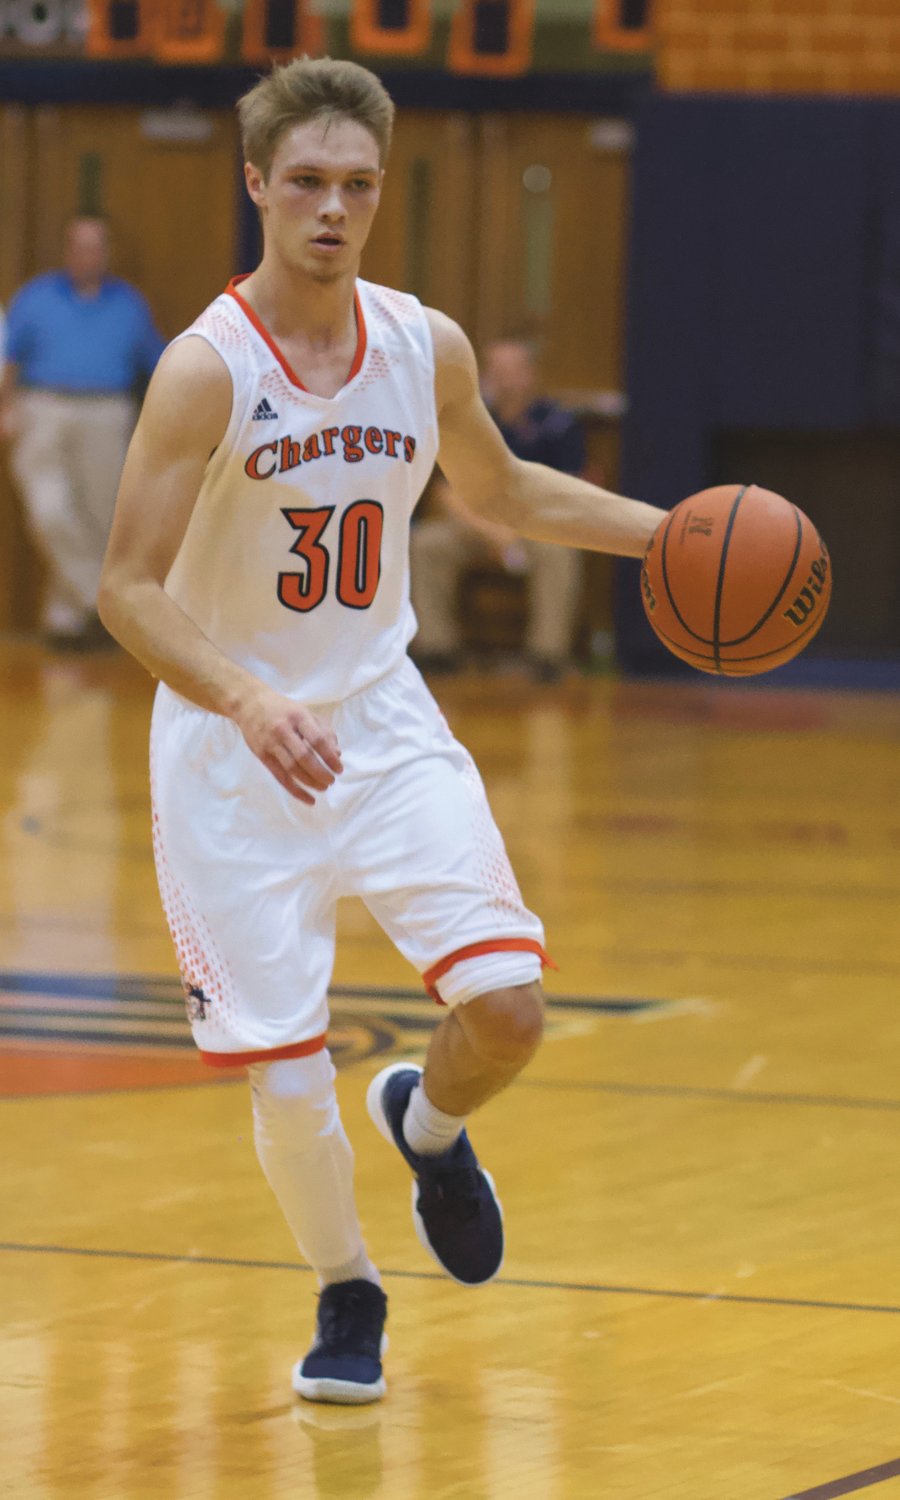 North Montgomery grad Justin Clary led the Chargers to a baseball sectional title and was a 1,000-point scorer in basketball.